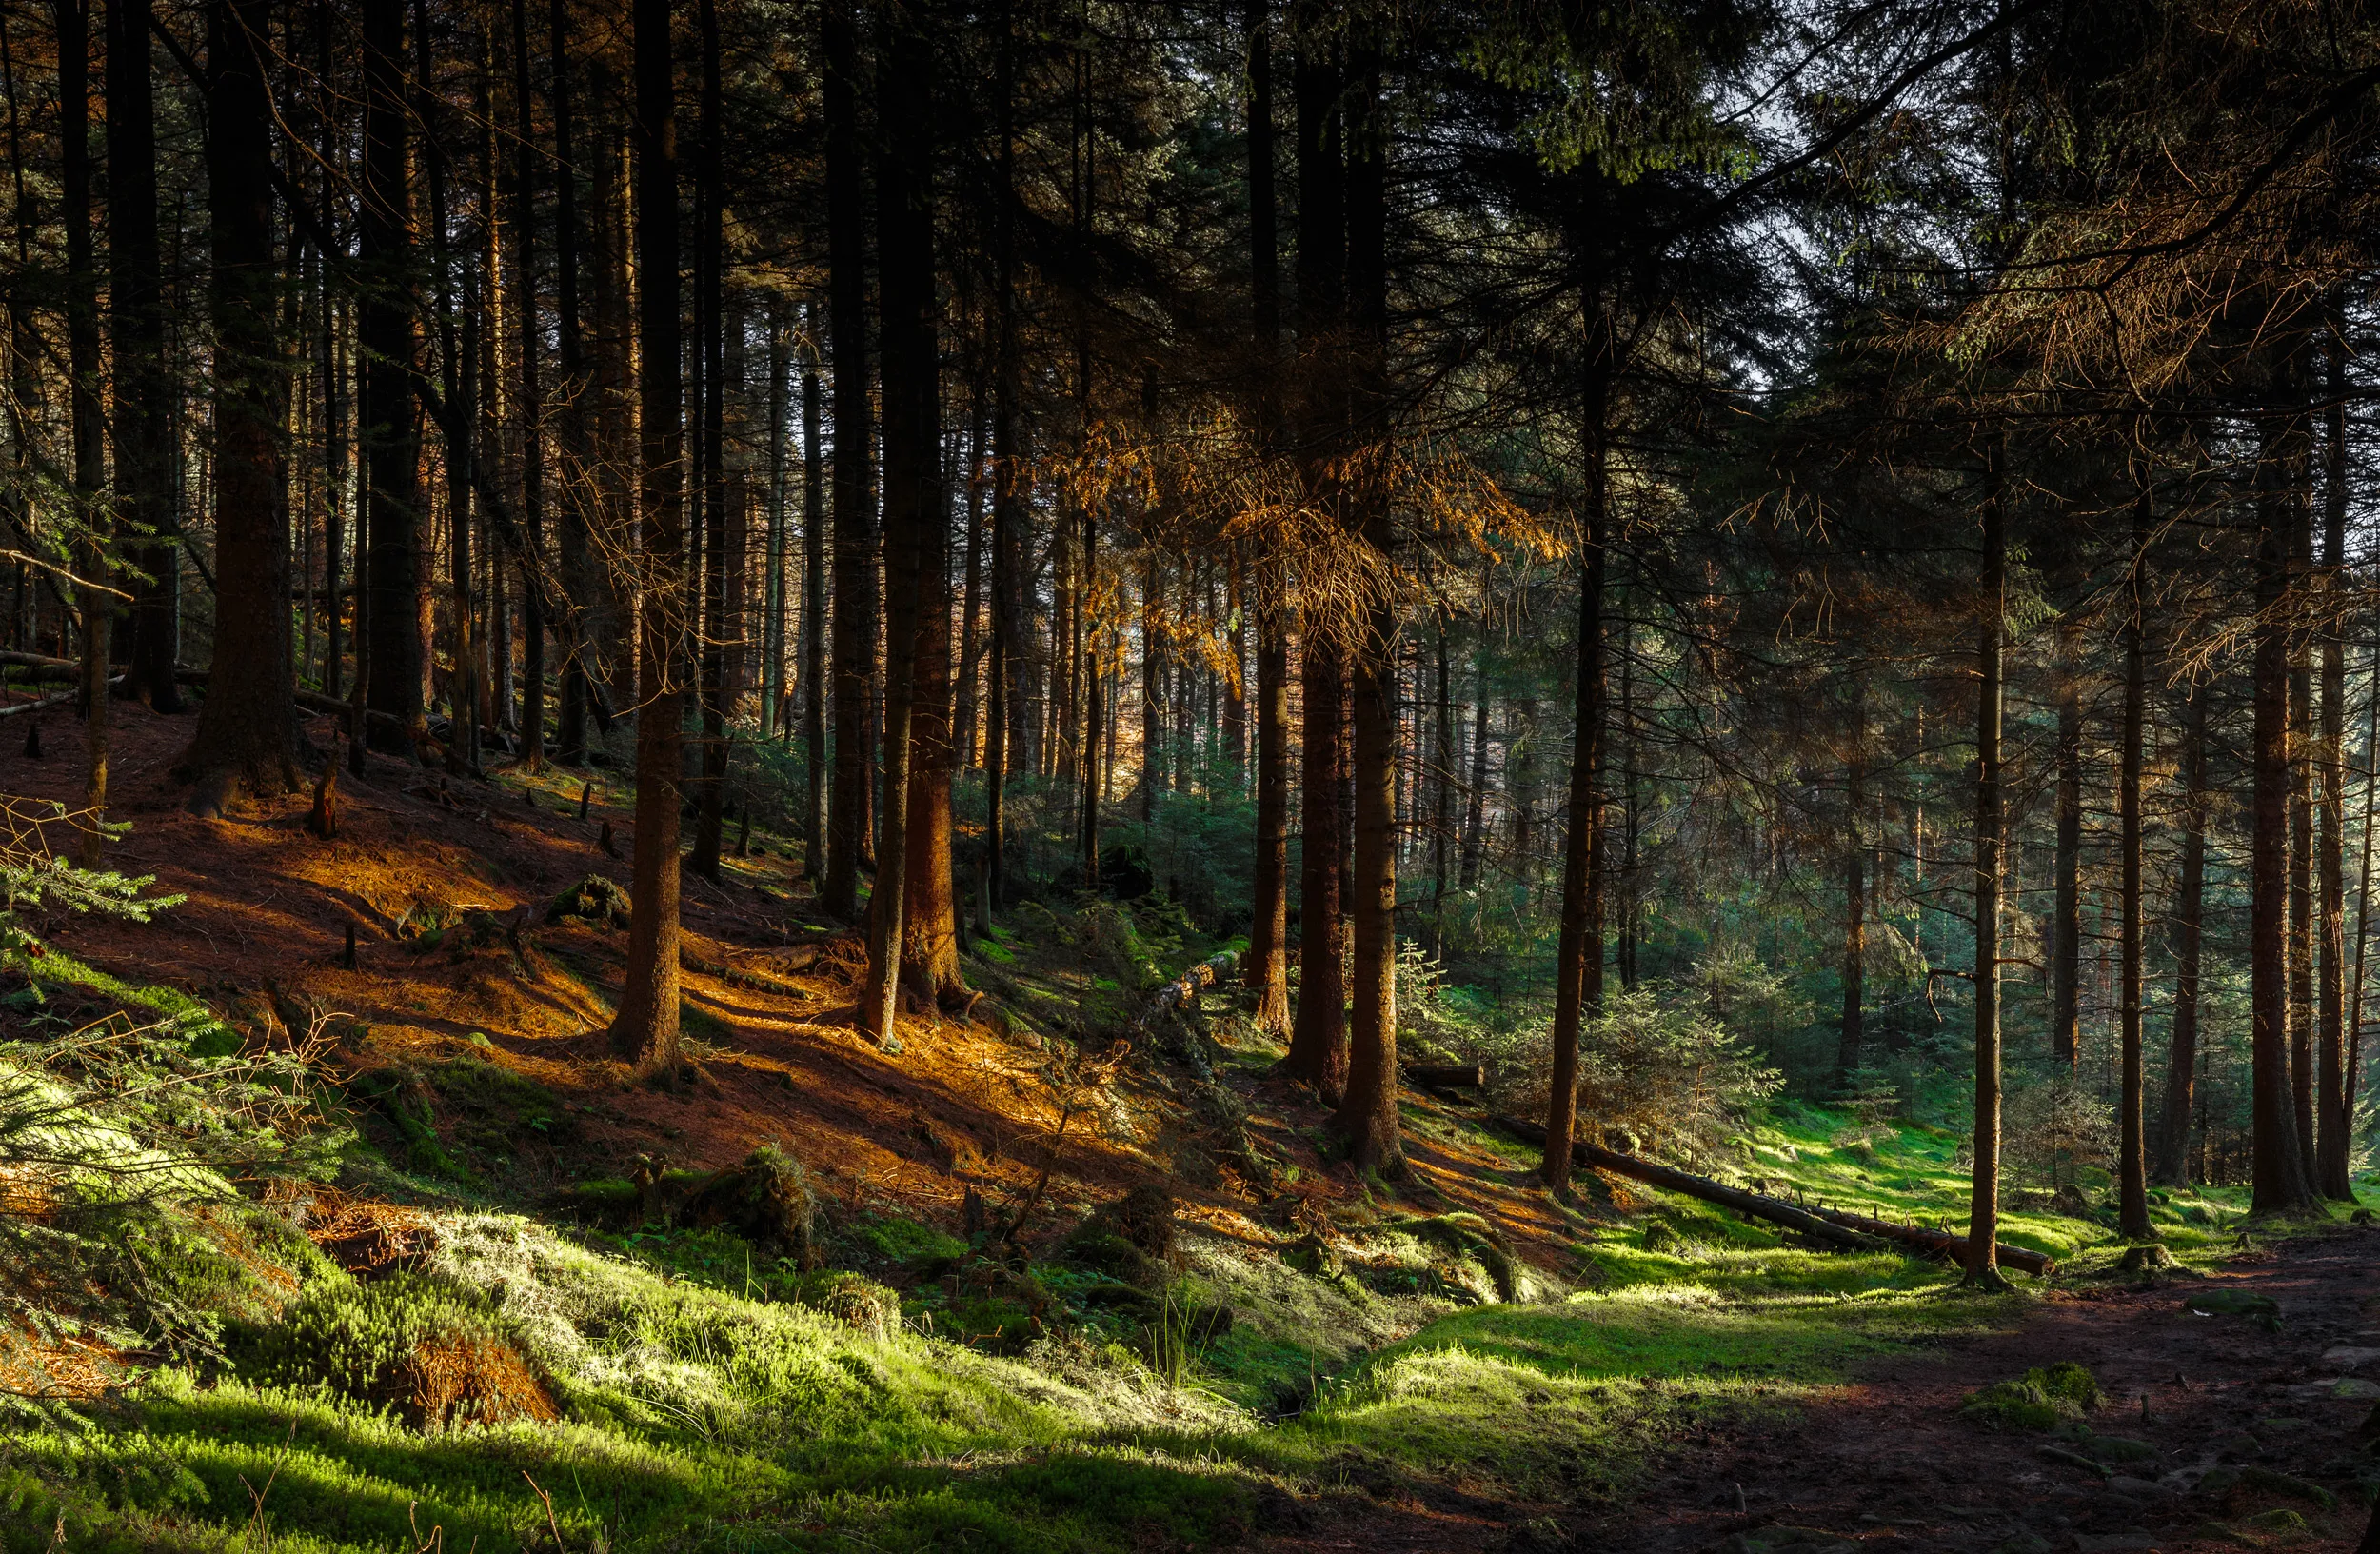 Dense woodland in low sun with tall, thin trees casting long shadows along the forest floor.